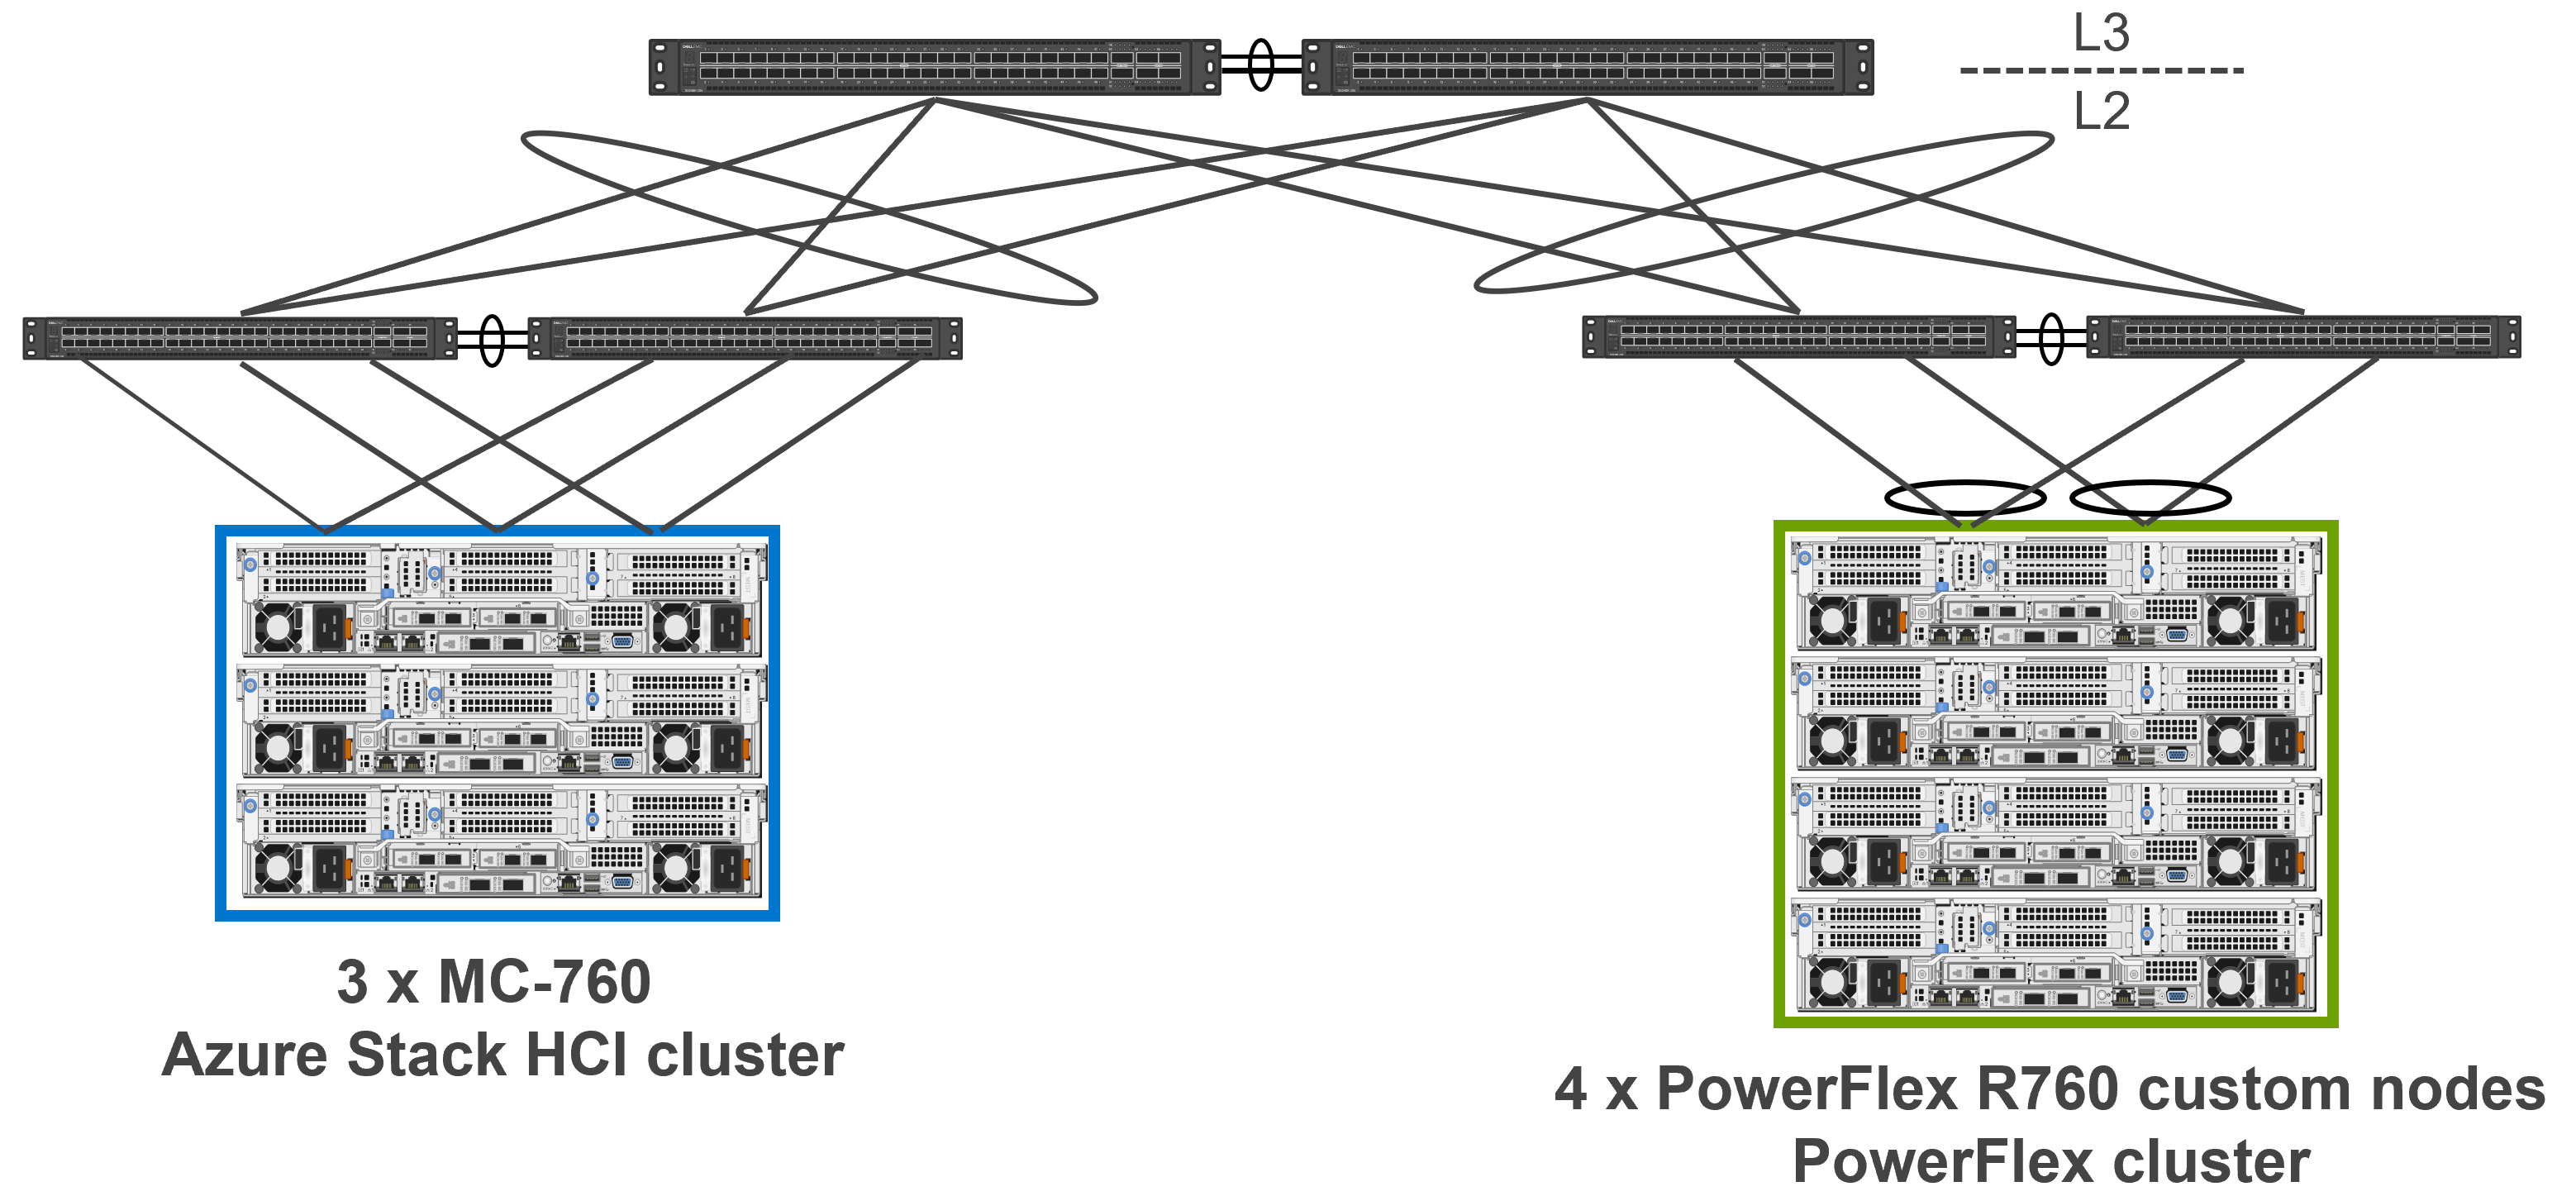 Illustration showing the high-level network infrastructure of the validation setup in the Dell lab.